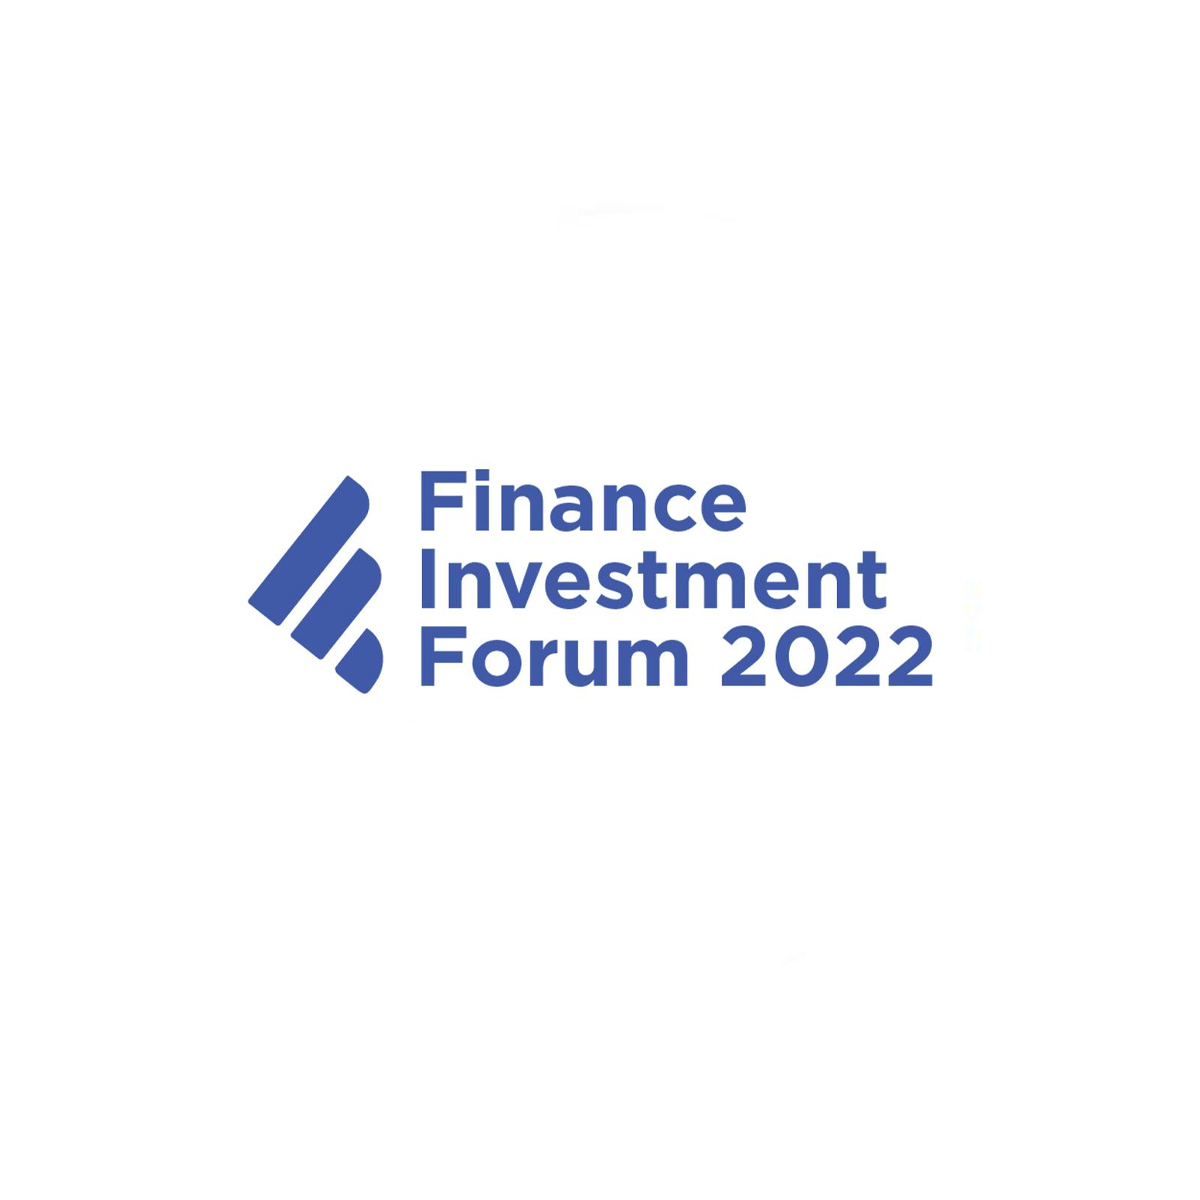  “Finance and İnvestment Forum” (FIF) 